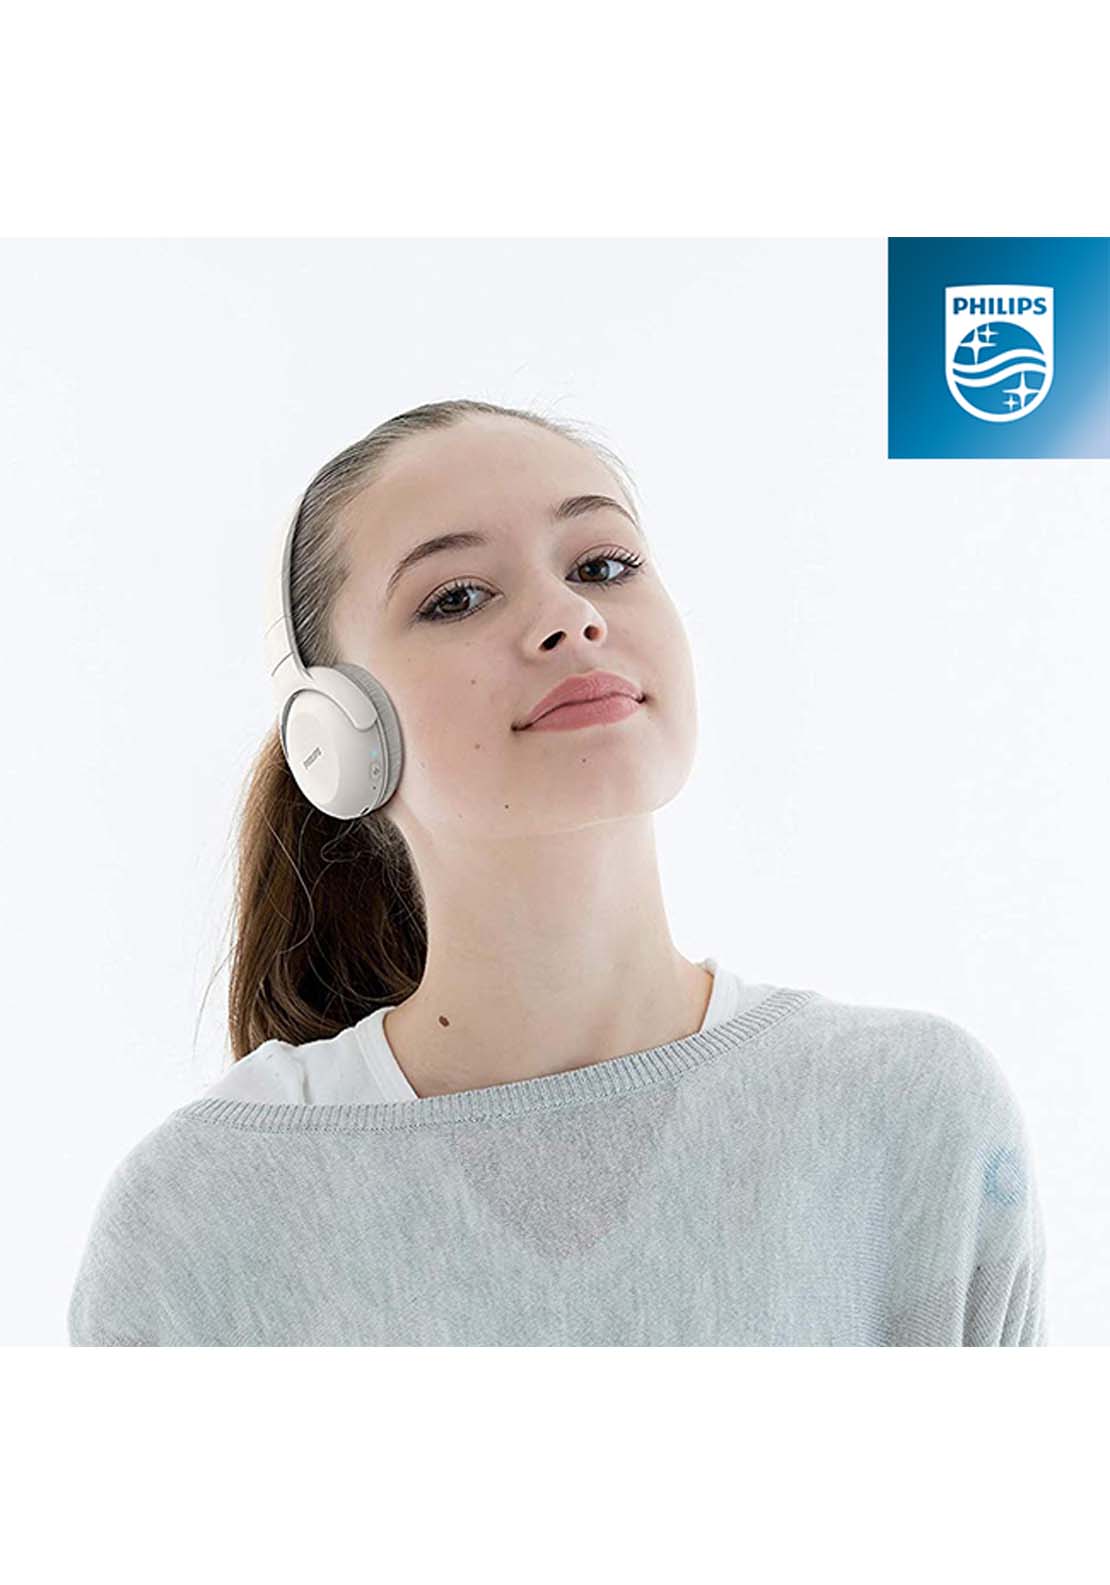 Philips On-Ear Bluetooth Headphones | Tauh202Wt00 2 Shaws Department Stores